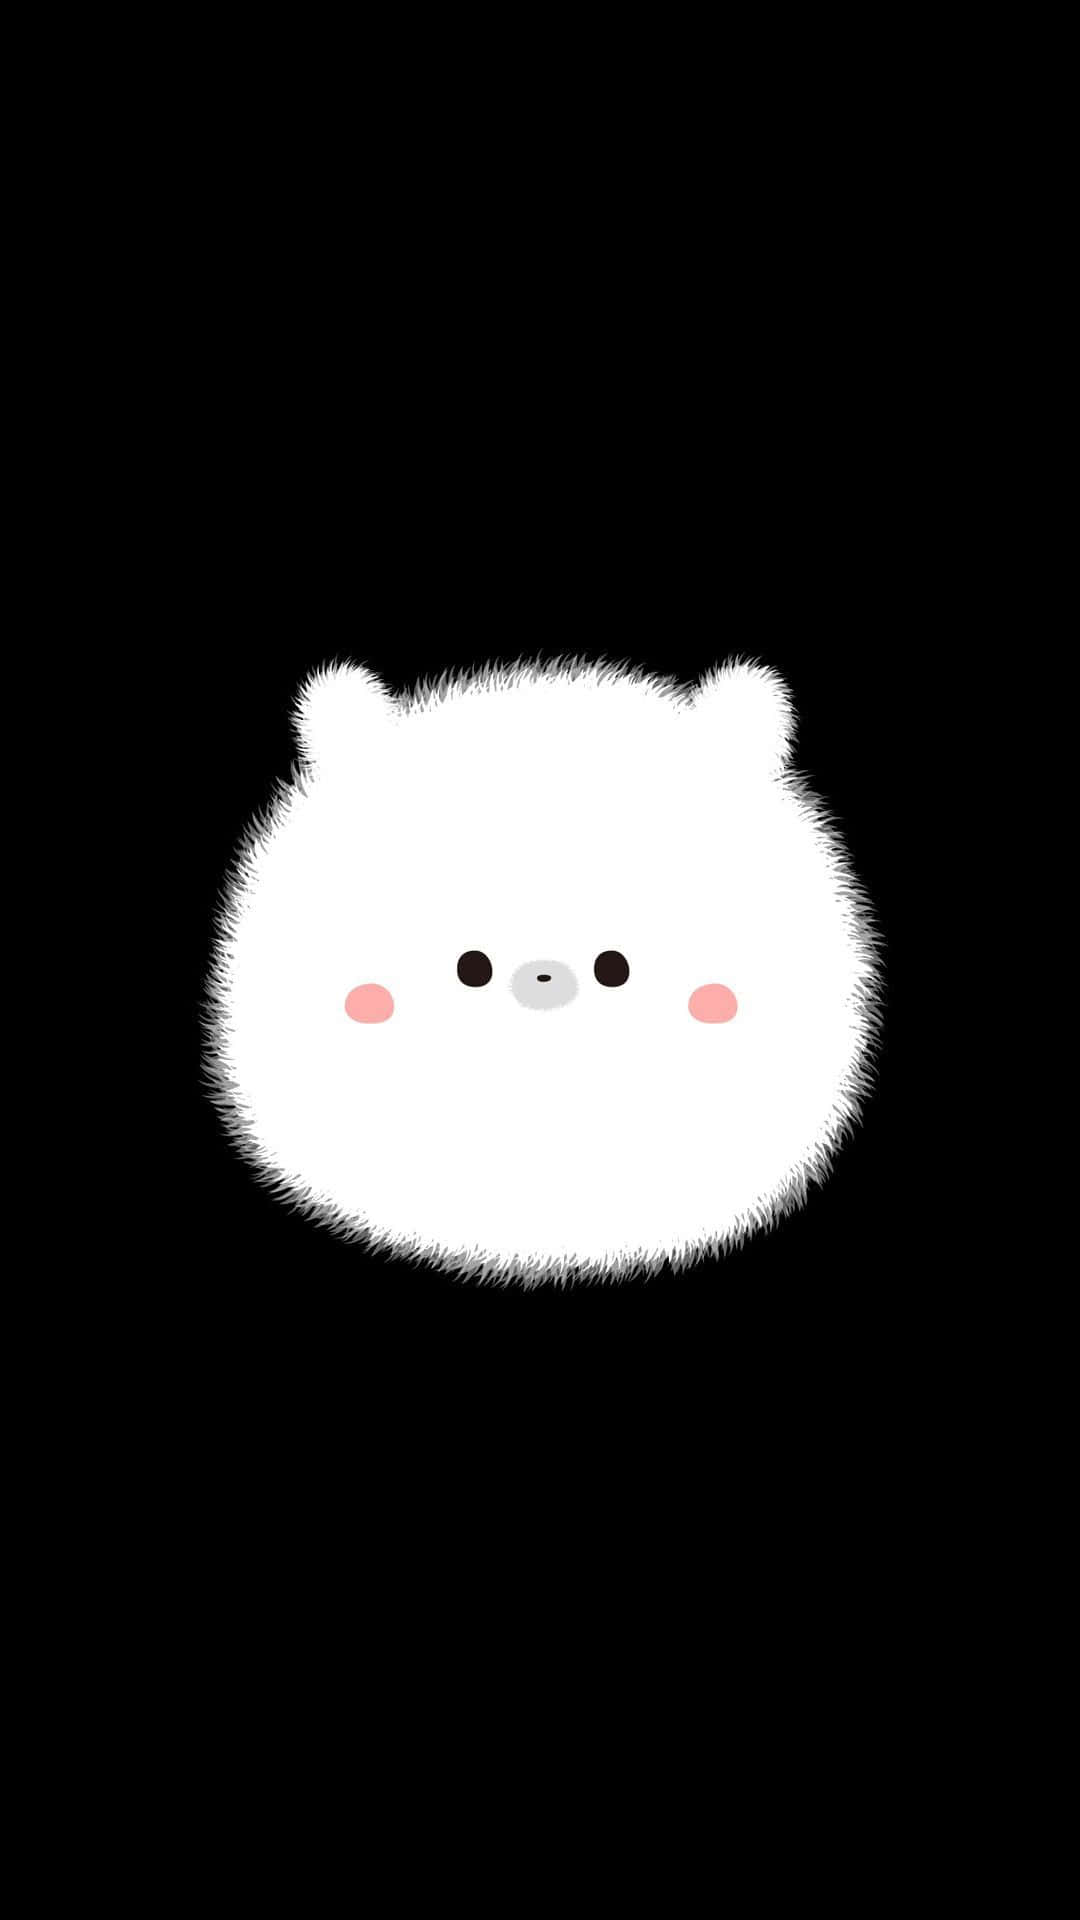 A White Bear With Pink Eyes On A Black Background Wallpaper